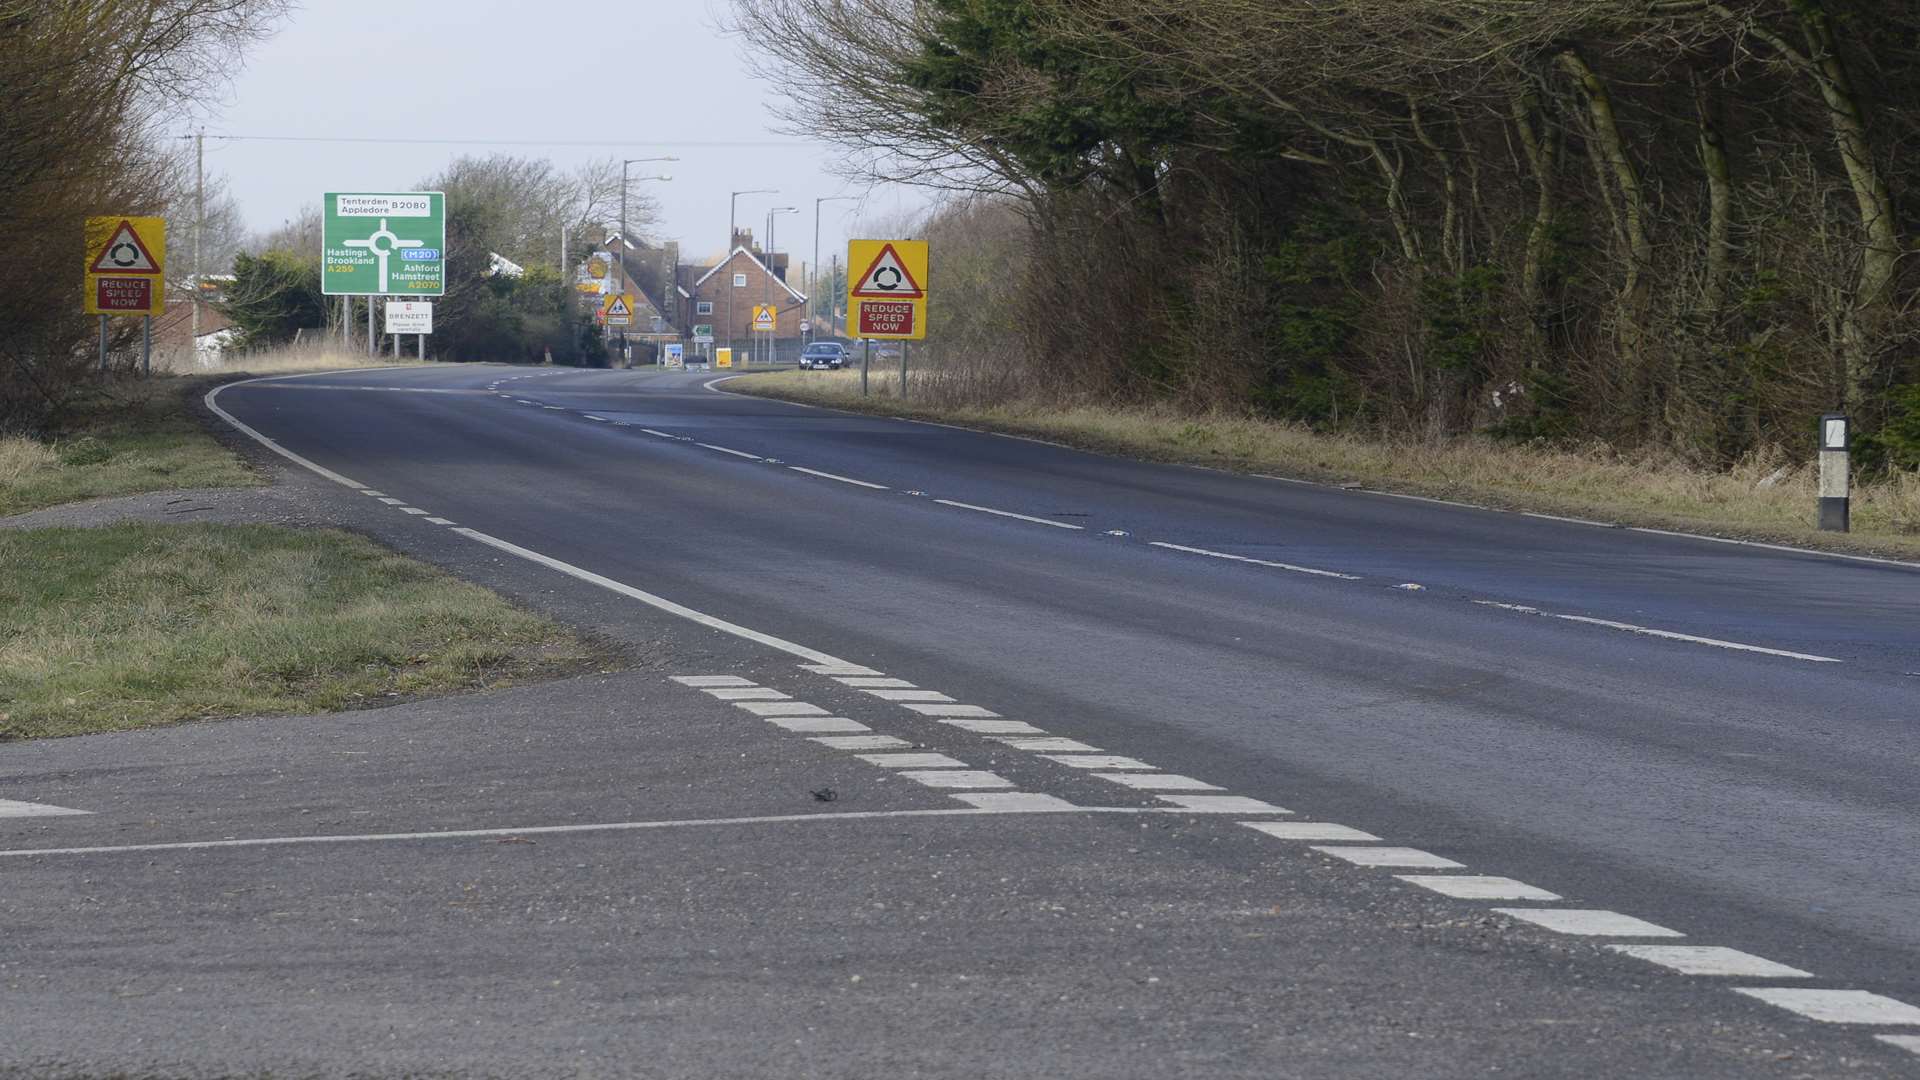 The area of the death crash, the A259 and Tickner's Lane junction near Brenzett